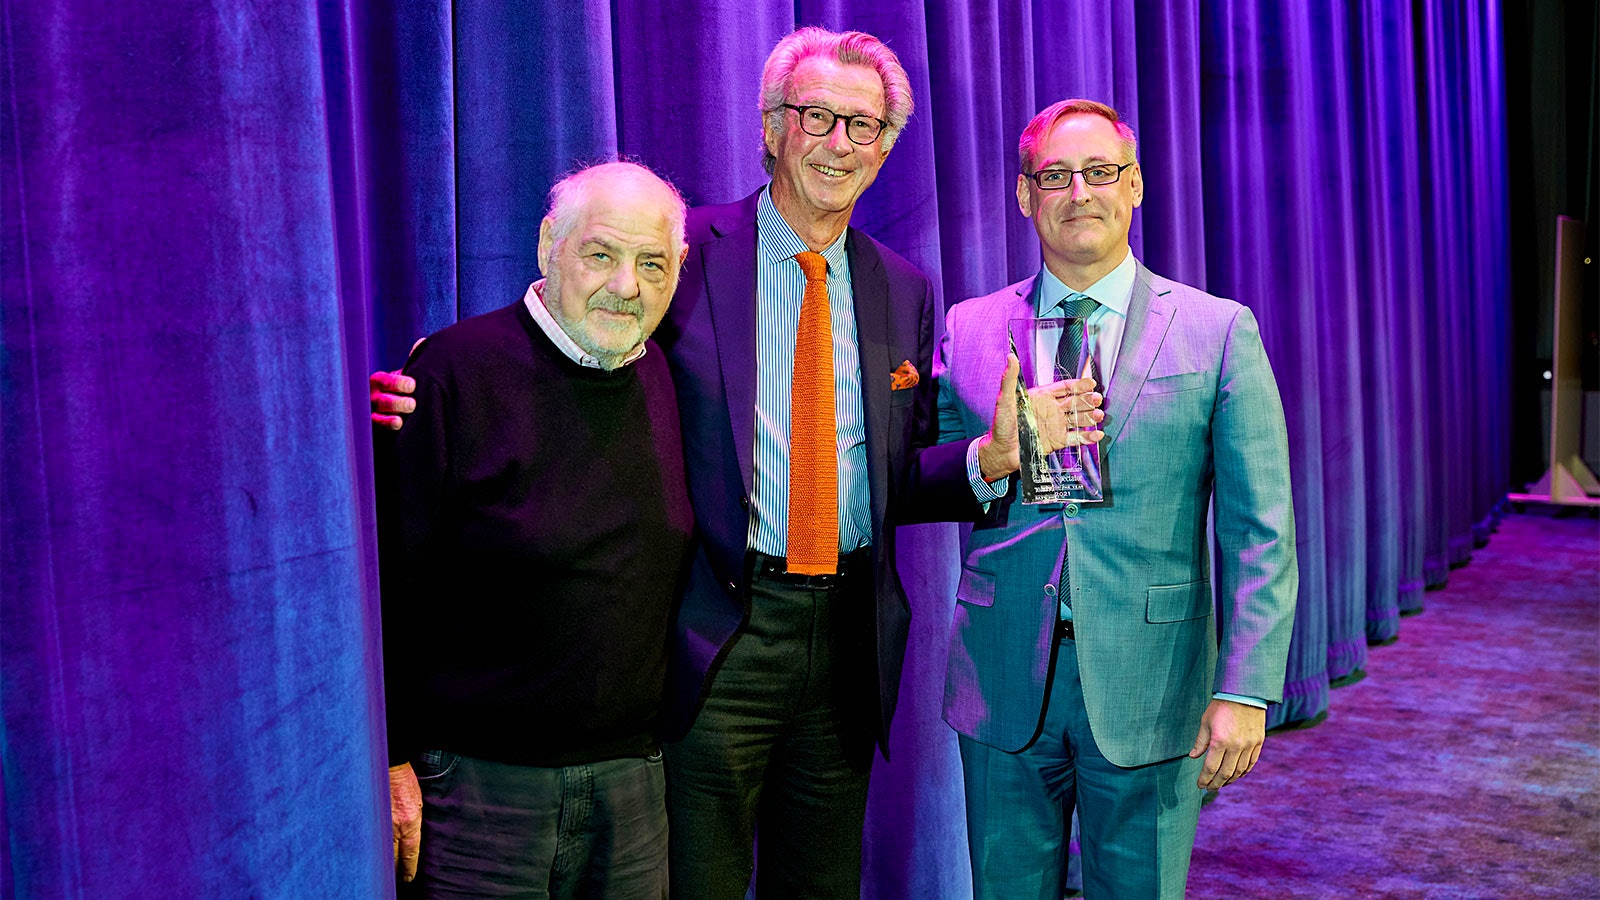  From left, Wine Spectator editor and publisher Marvin R. Shanken, Dominus founder Christian Moueix holding the 2021 Wine of the Year award and senior editor James Molesworth